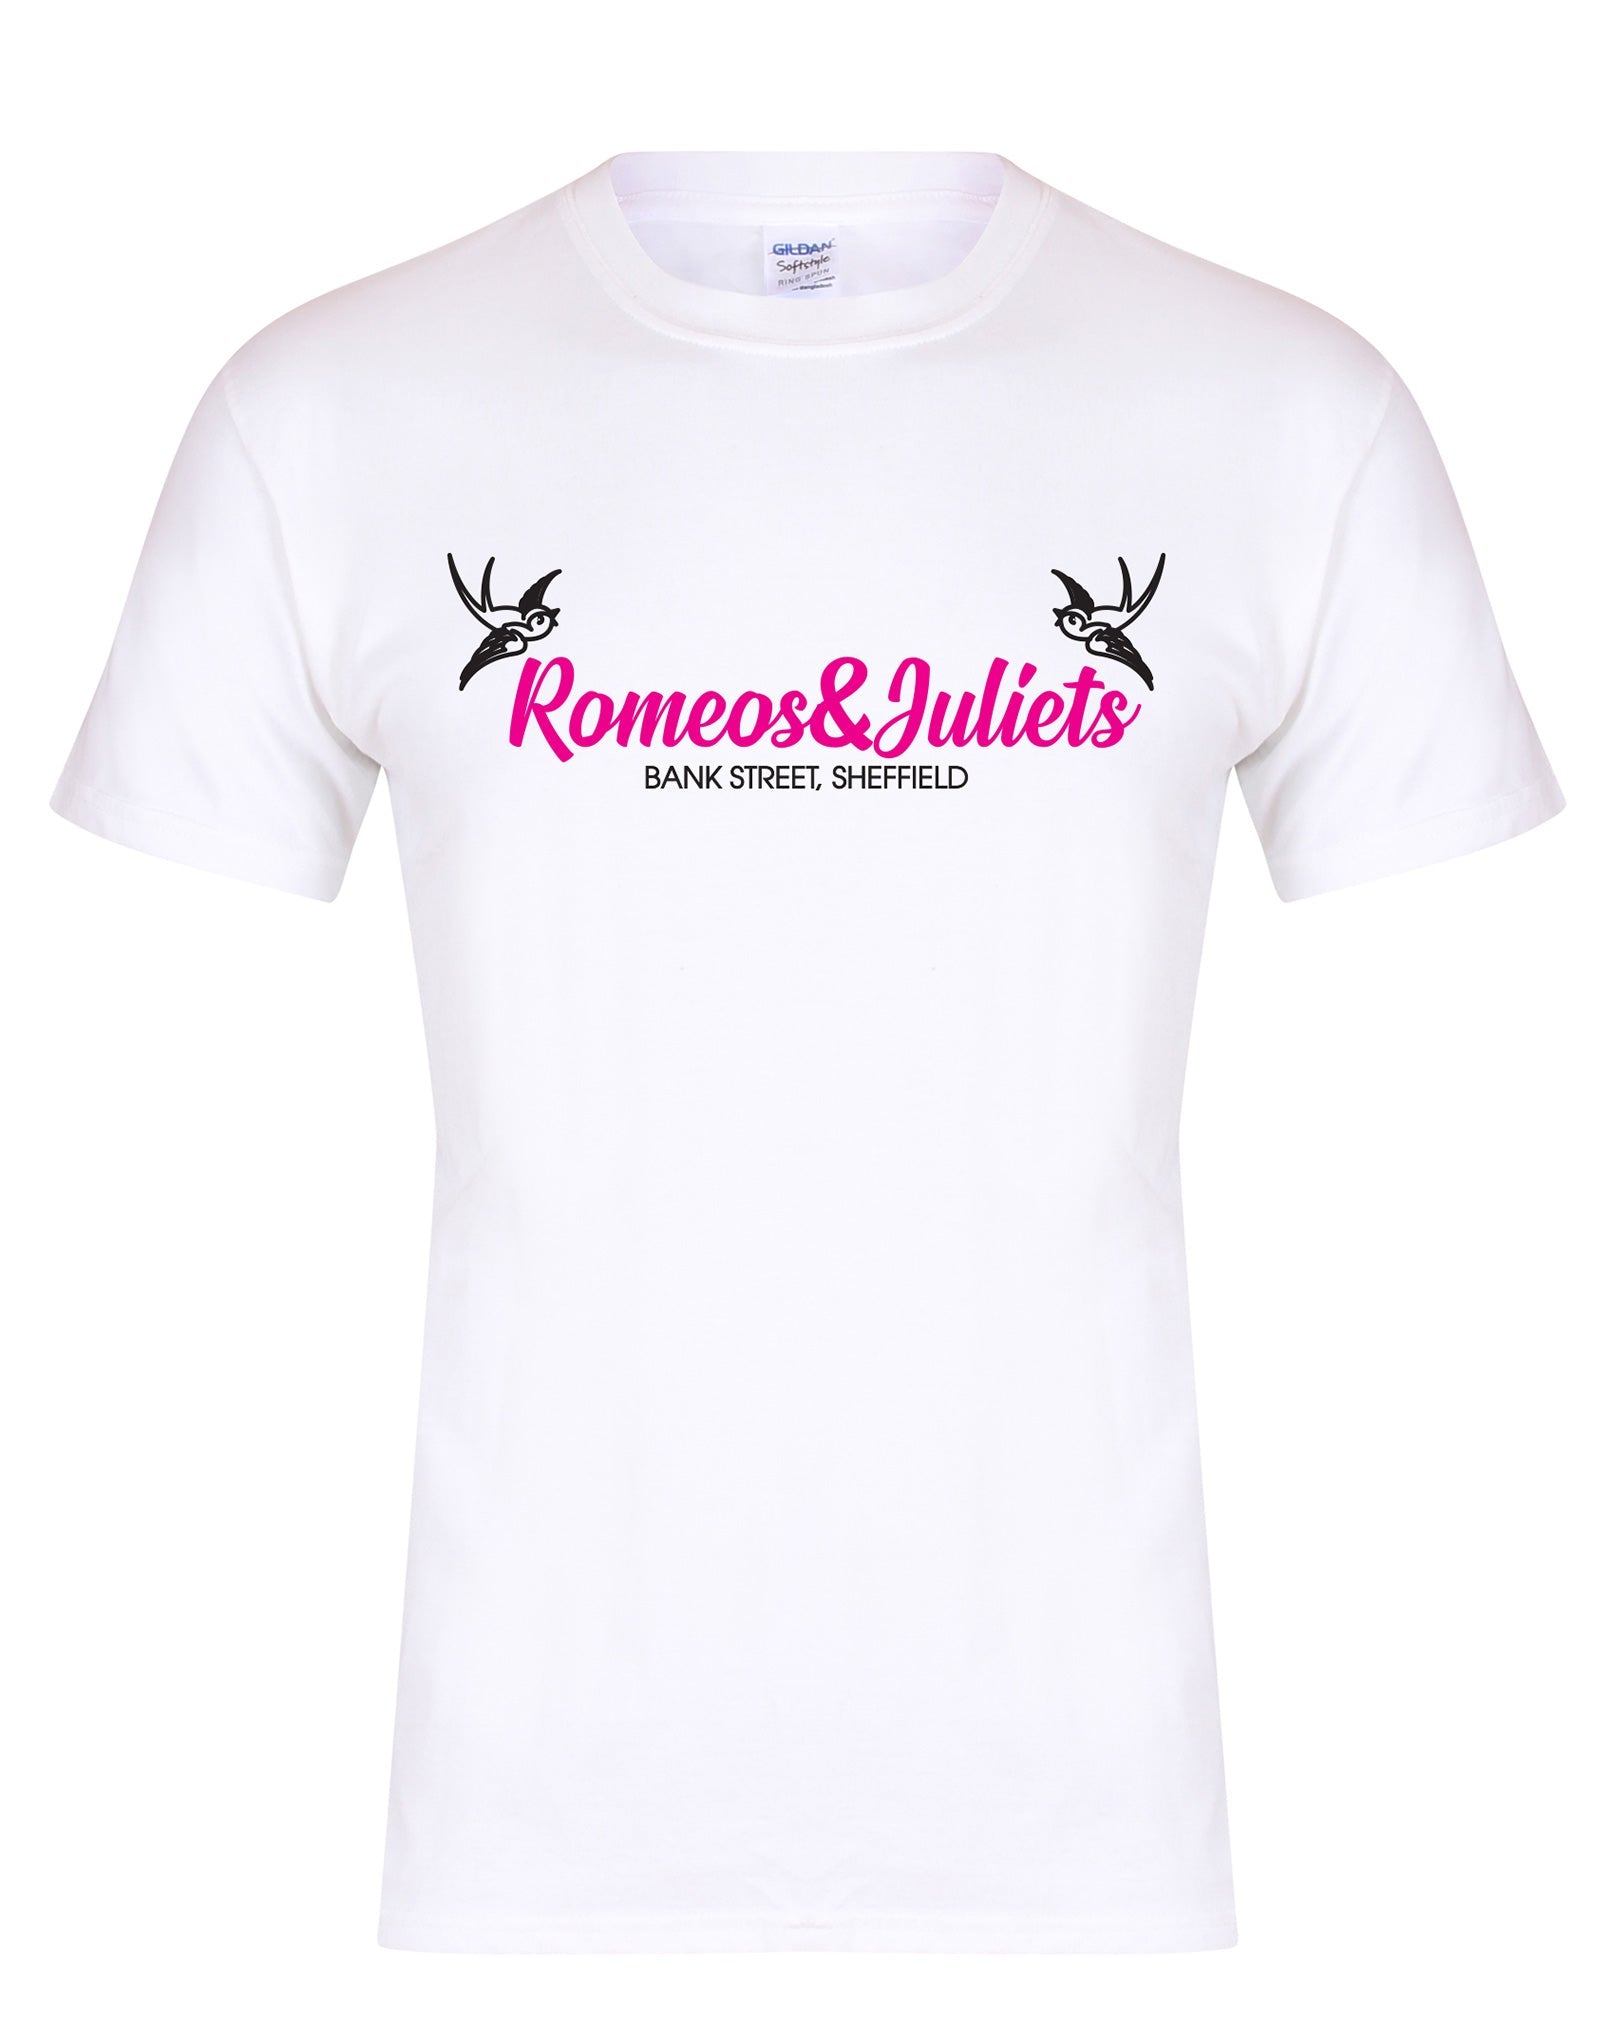 Romeos & Juliets unisex fit T-shirt - various colours - Dirty Stop Outs